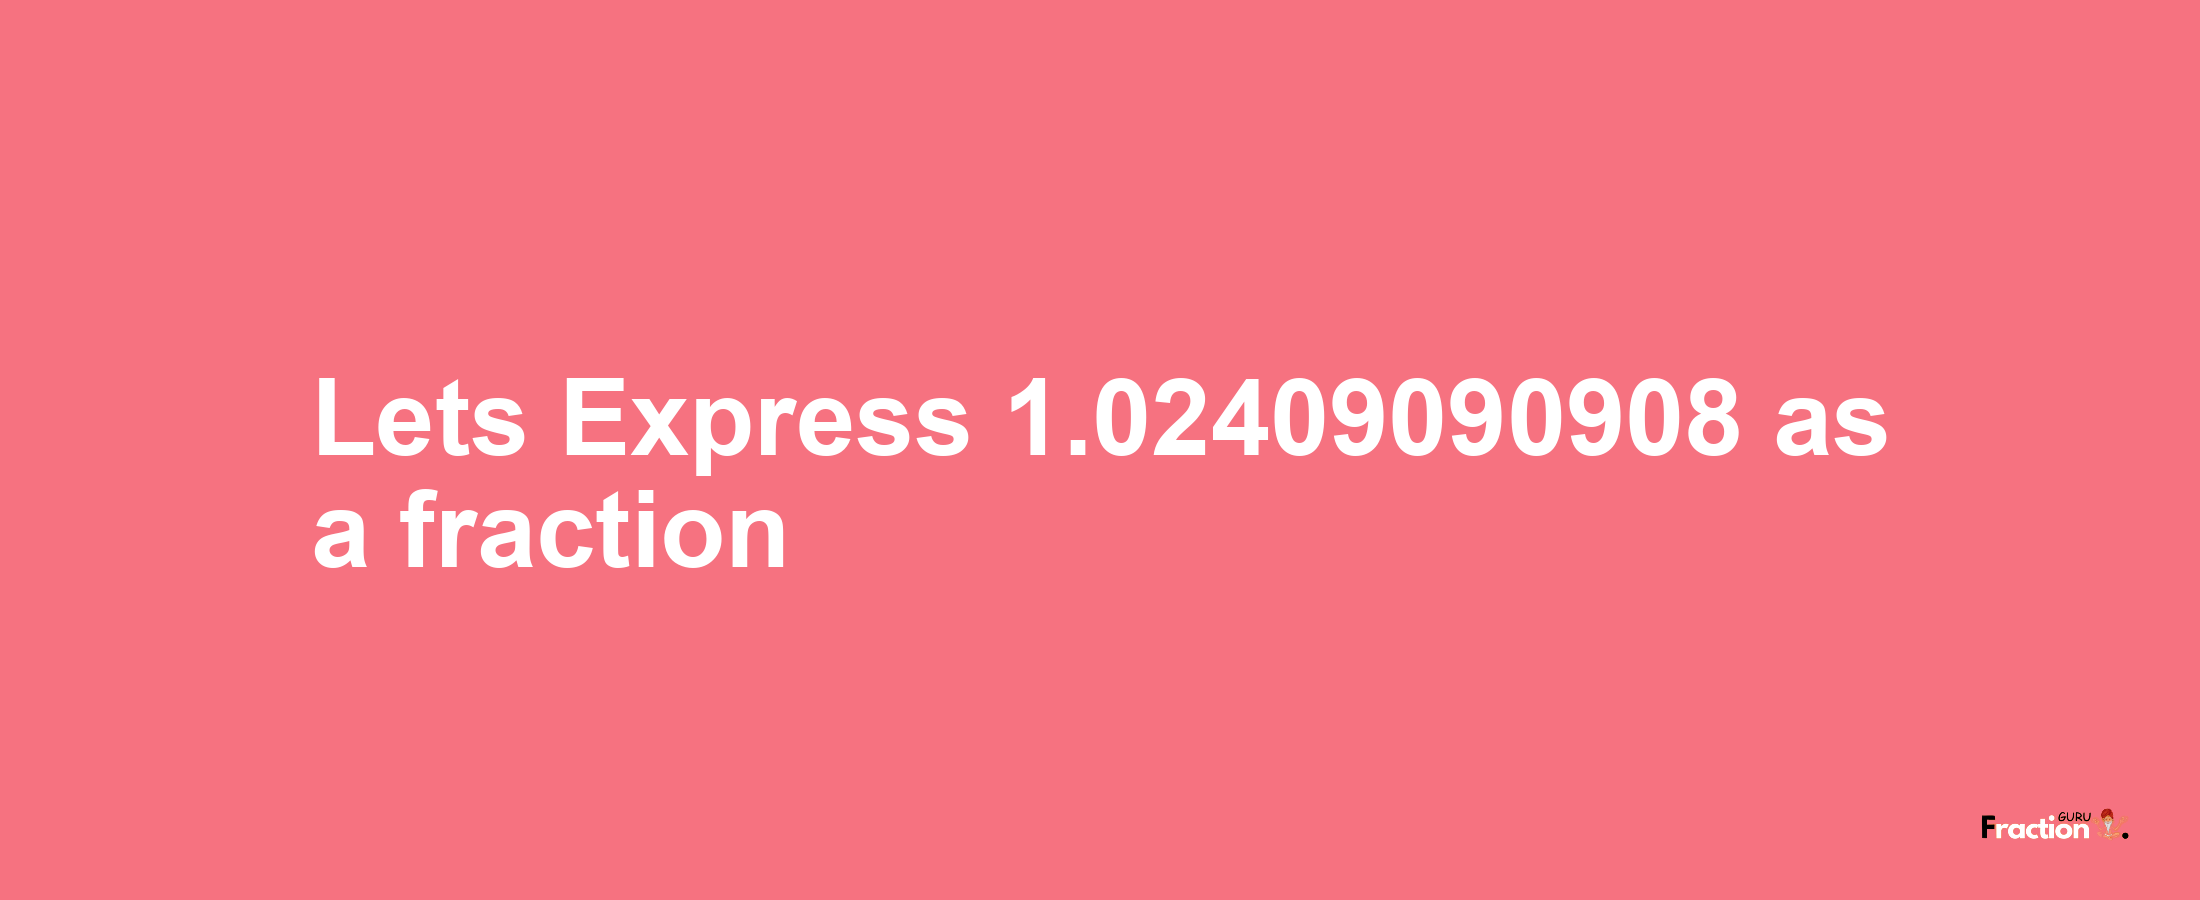 Lets Express 1.02409090908 as afraction